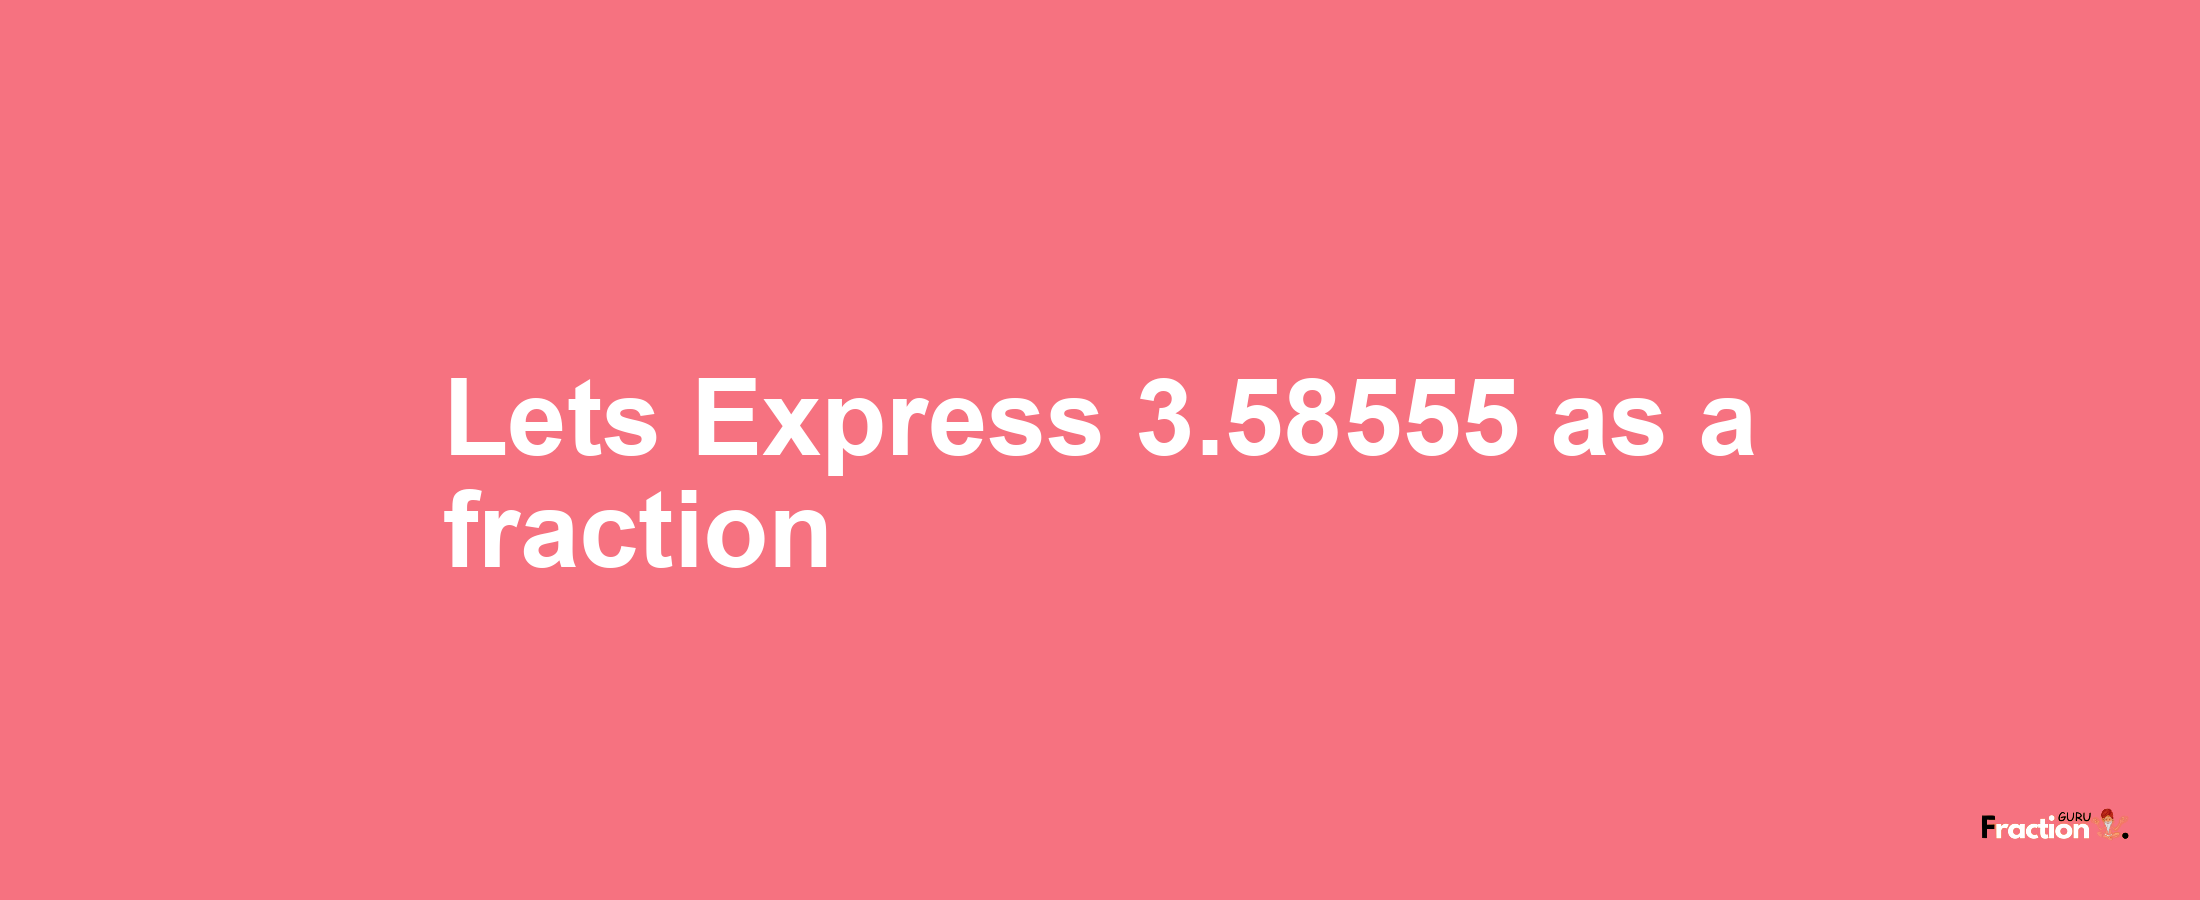 Lets Express 3.58555 as afraction